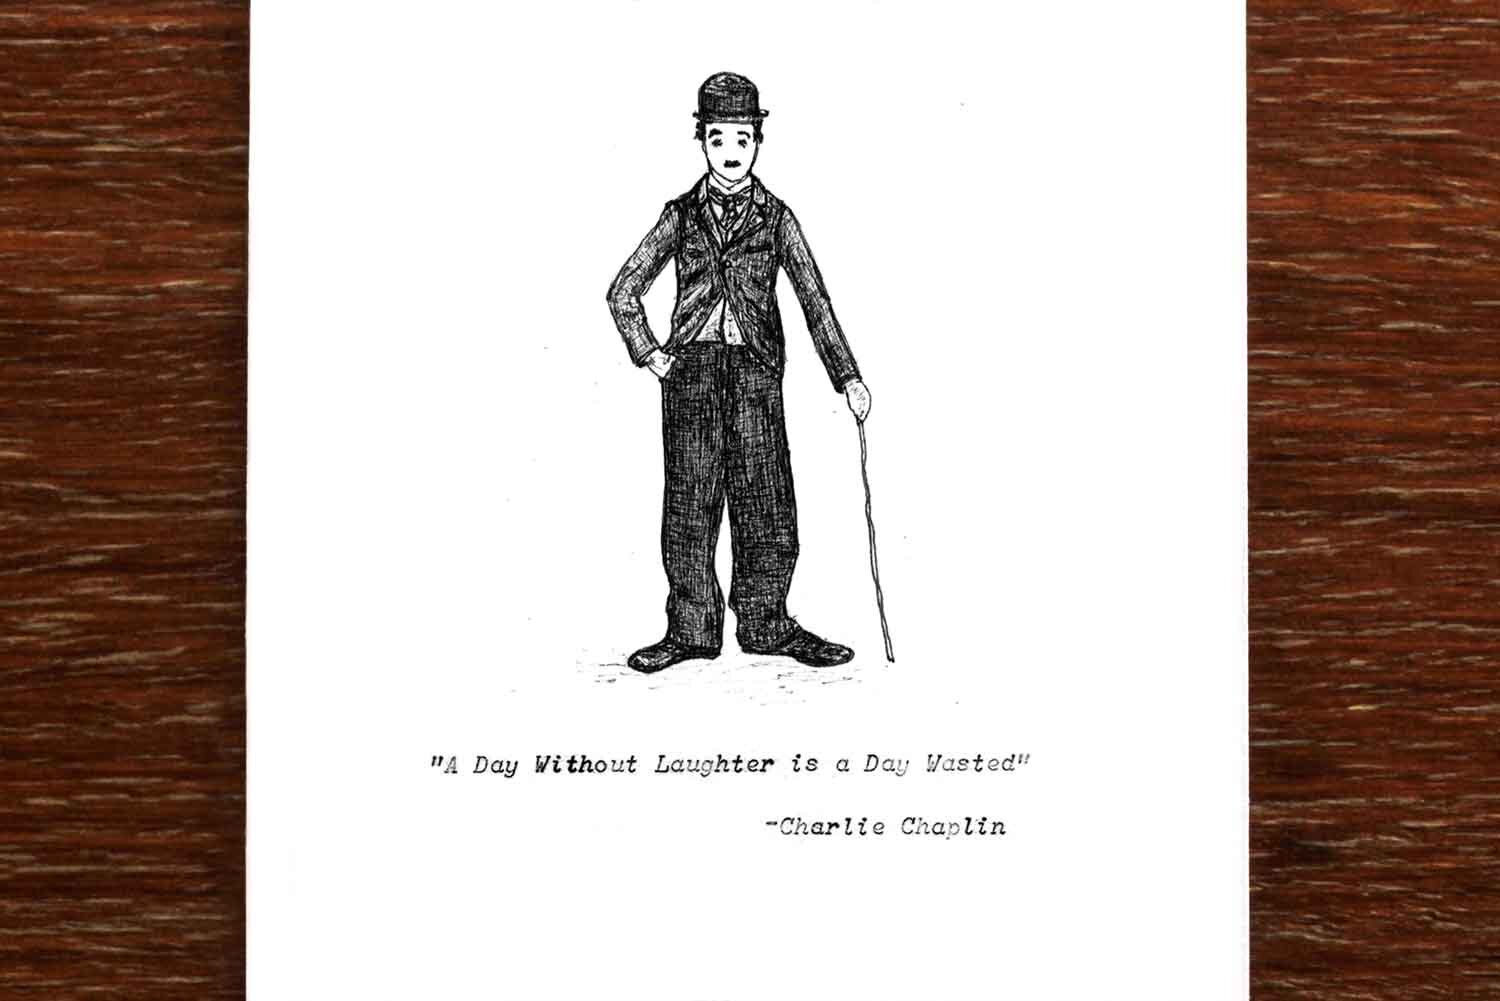 Charlie Chaplin A Day Without Laughter - Greeting Card